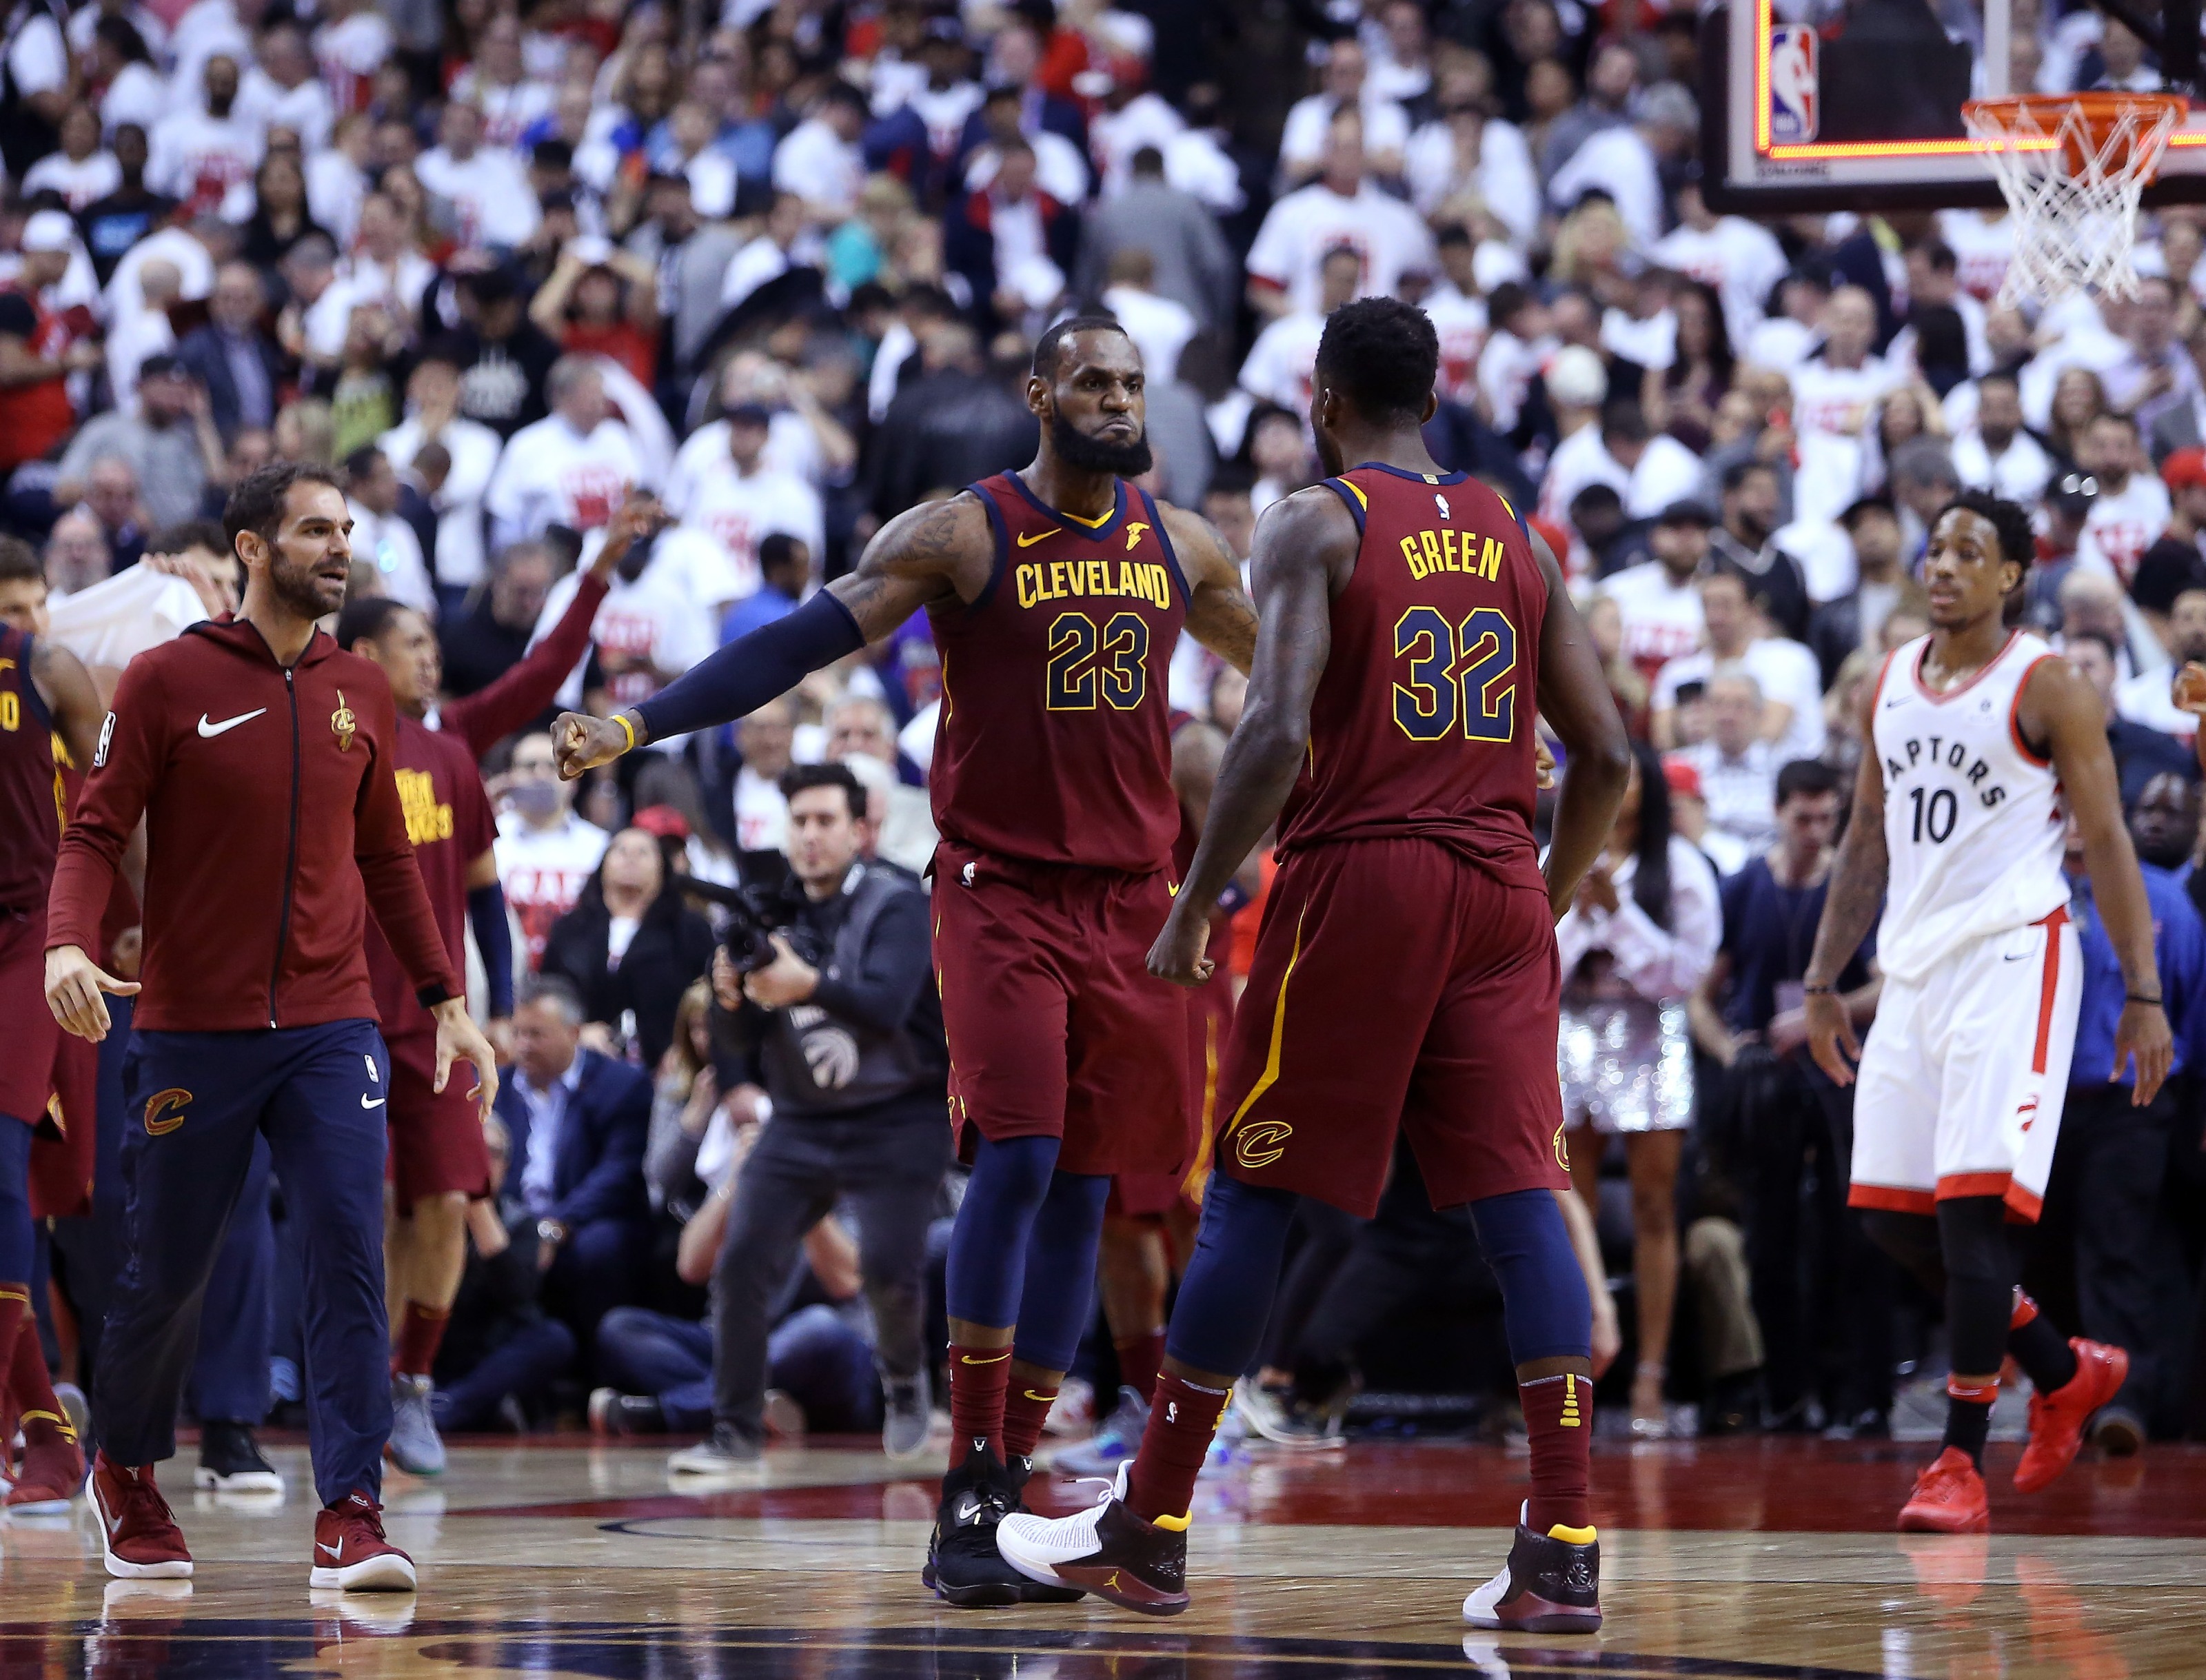 The Cleveland Cavaliers need Jeff Green to shine in Game 3